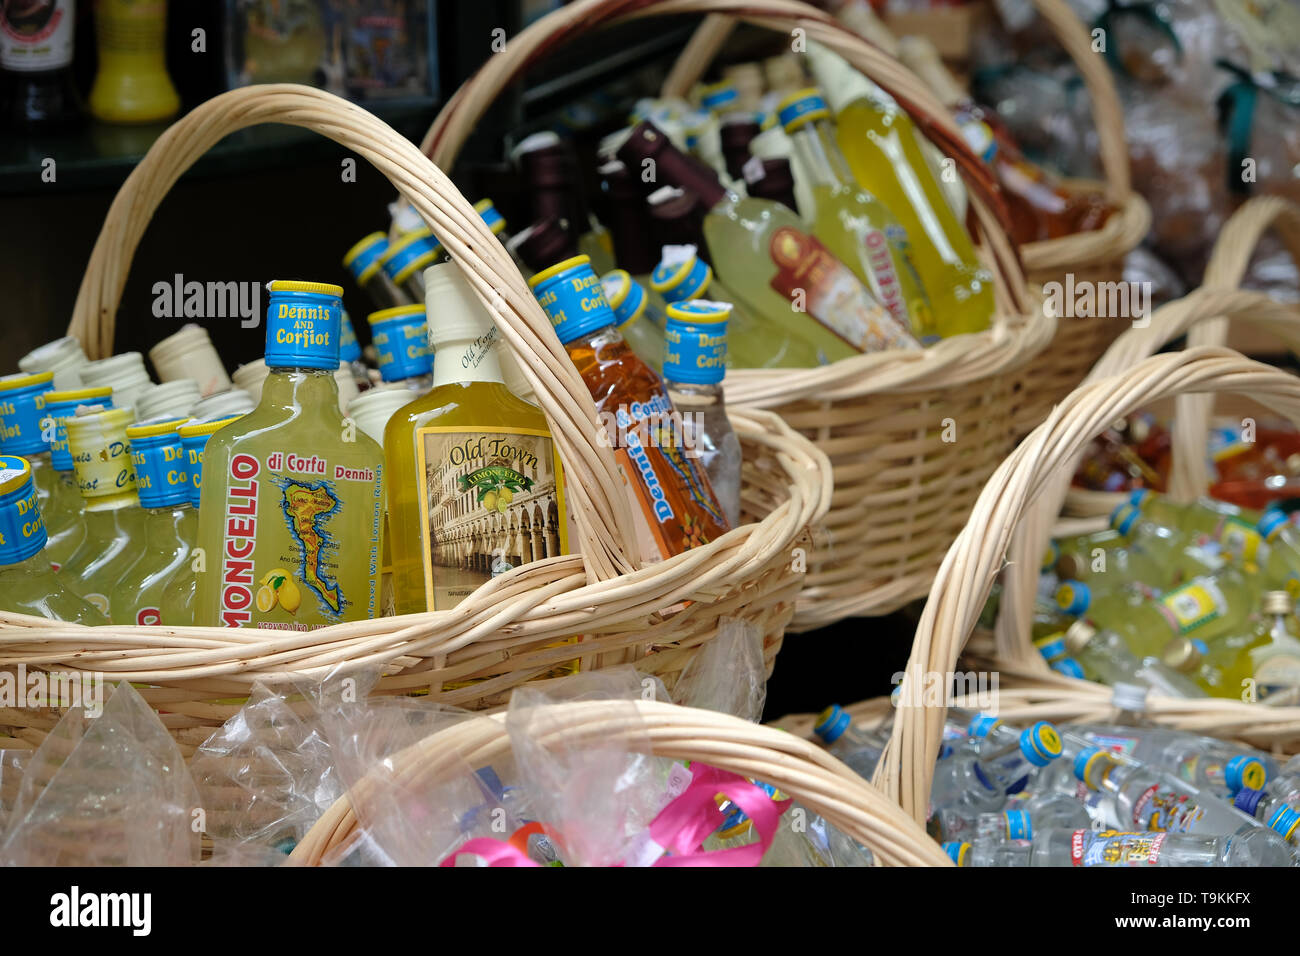 Corfu, Greece - May 10, 2019 - Baskets full of small alcohol bottles which are sold throughout Corfu town Stock Photo